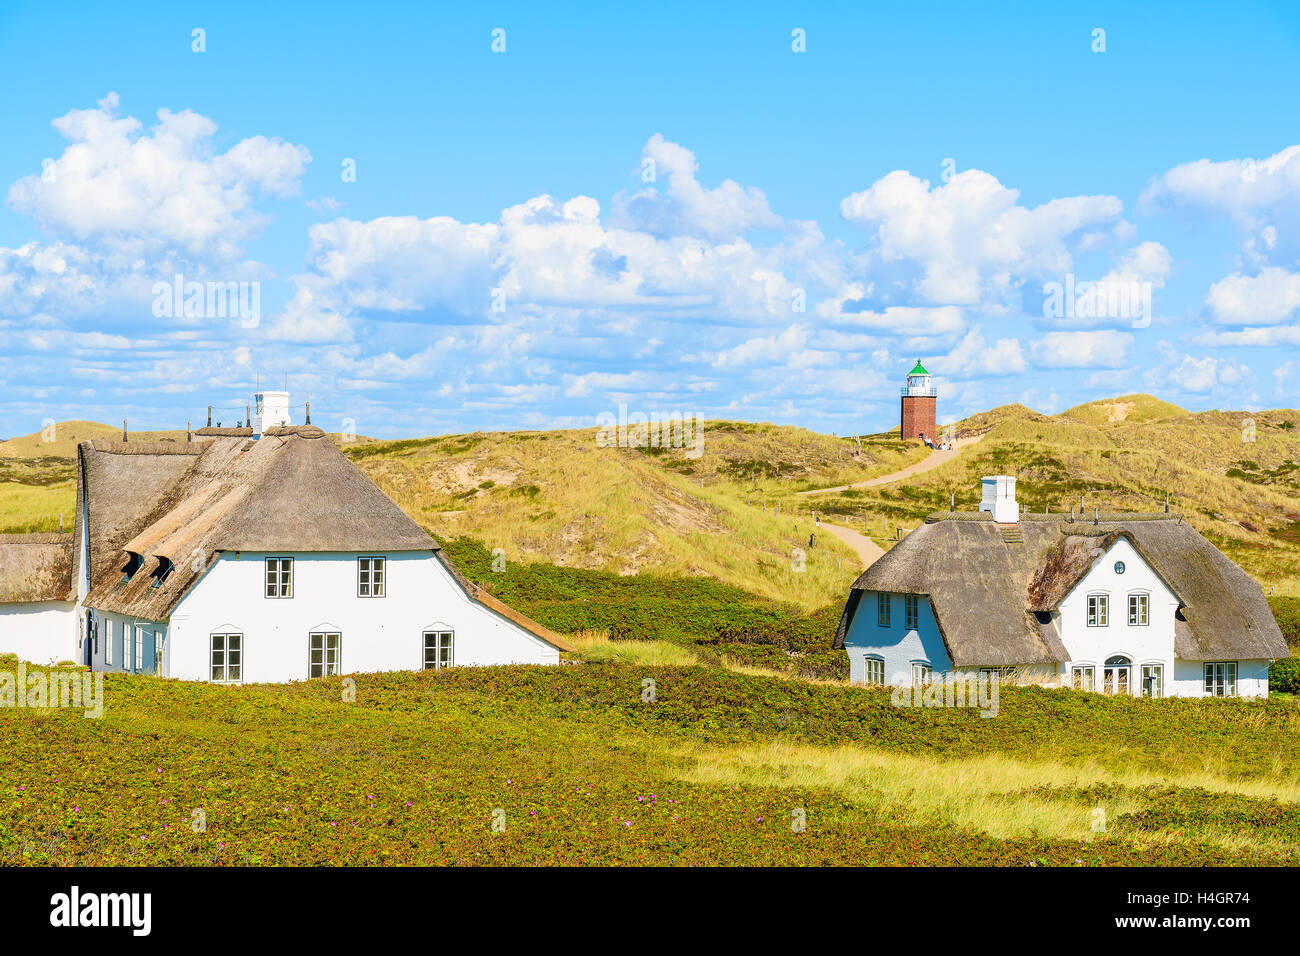 Typical Frisian houses with straw roofs on sand dunes in Kampen village, Sylt island, Germany Stock Photo